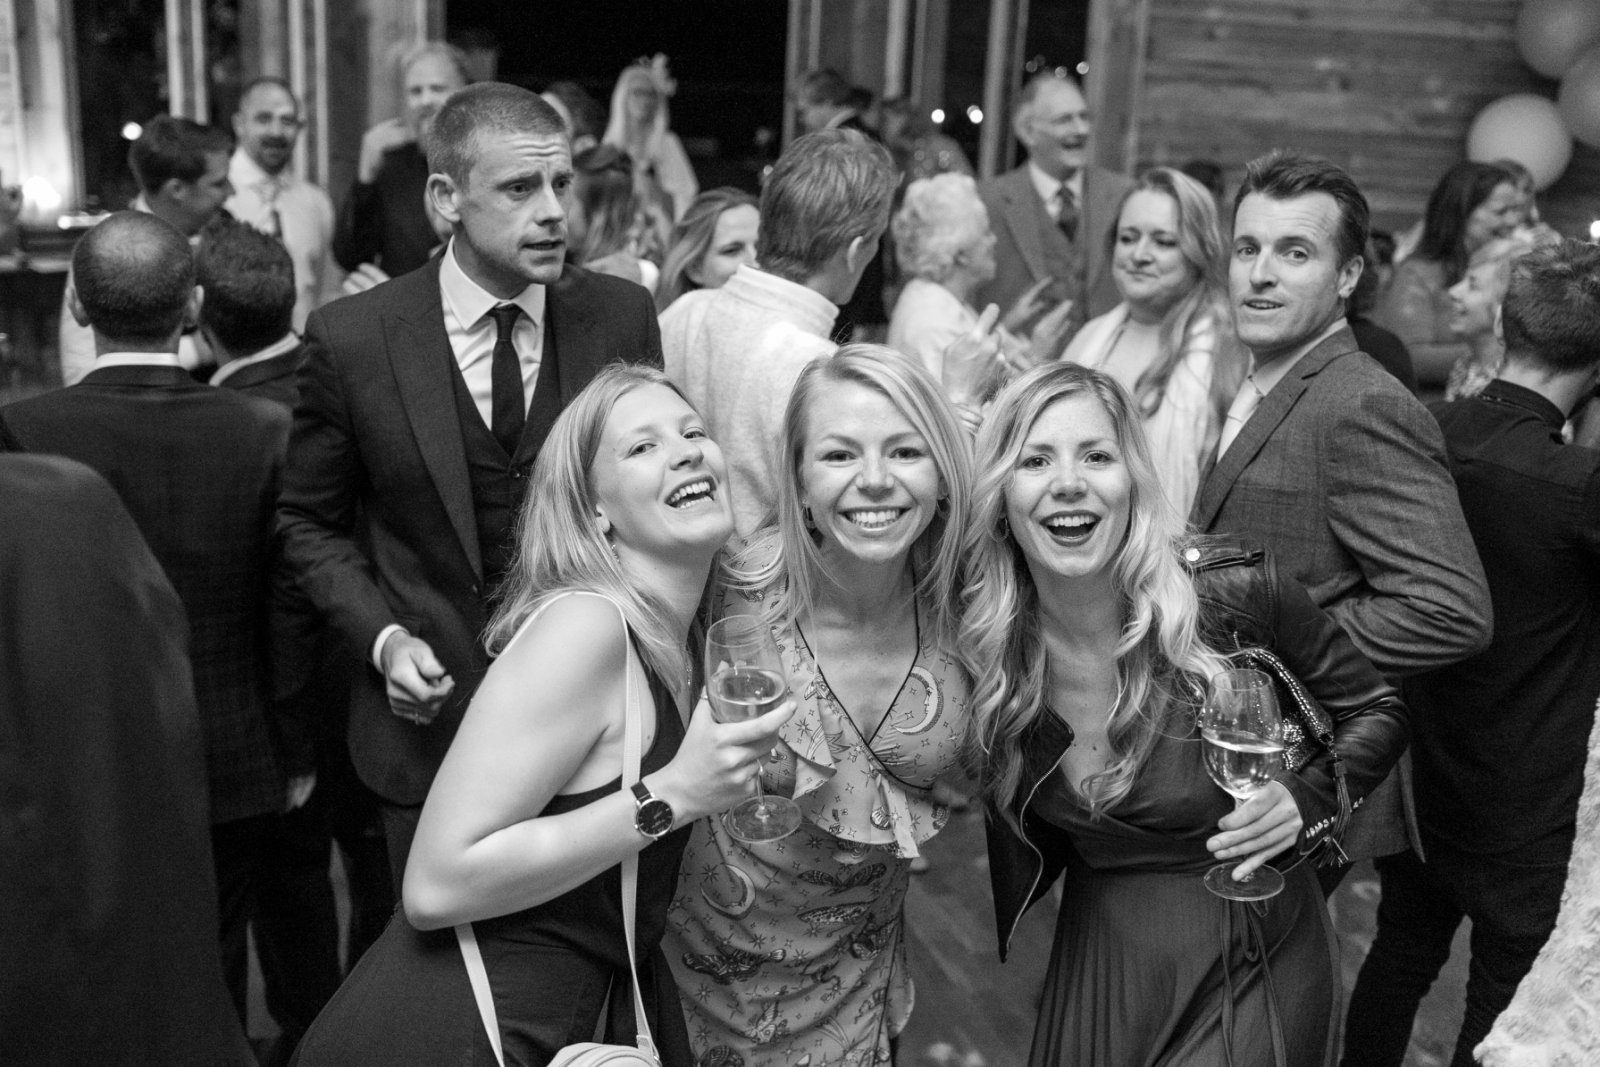 Wedding guests partying the night away at High Billinghurst Farm